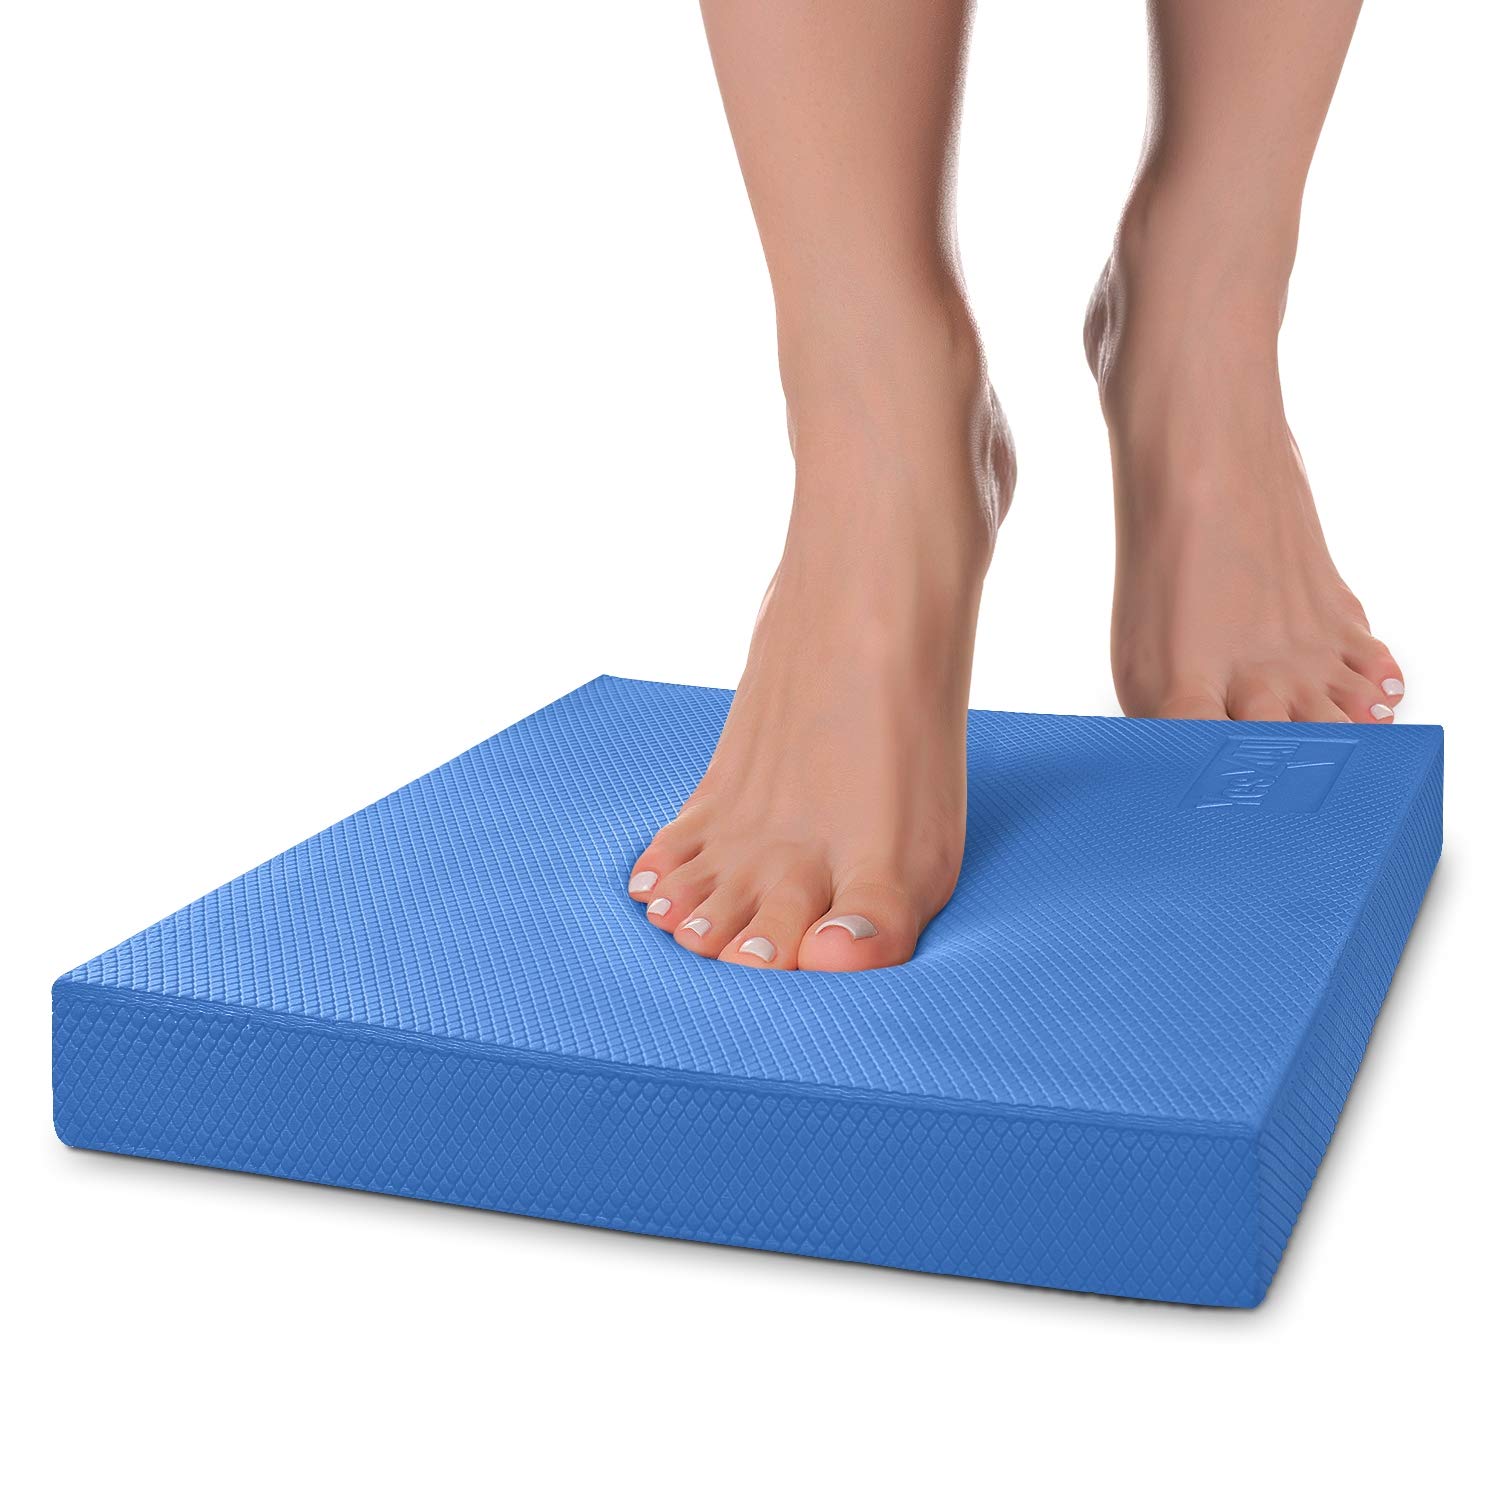 Yes4All Foam Balance Pad for Gym Workout, Fitness Exercise- Suitable for Home and Work